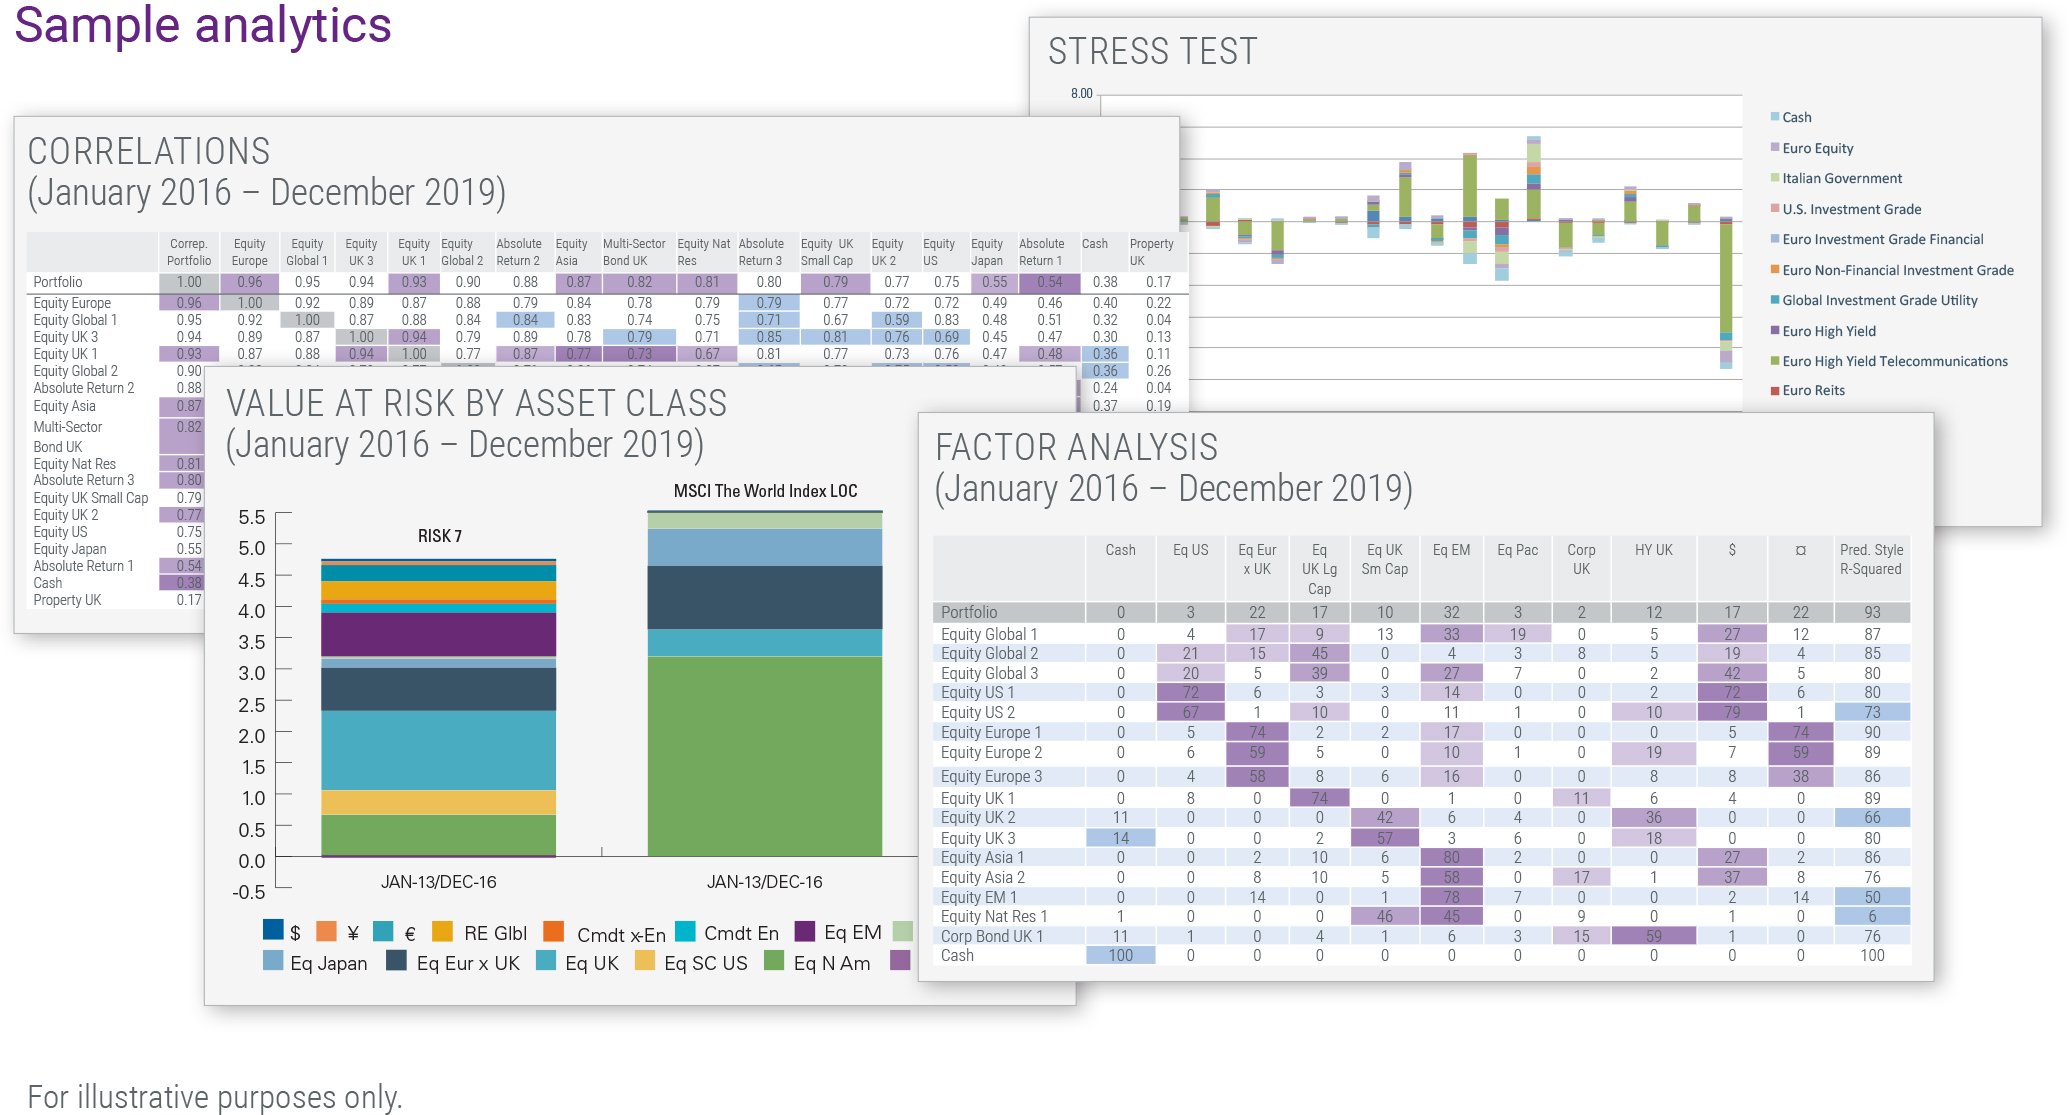 Image showcasing sample analytics in 4 categories: Correlations, stress test, value at risk by asset class, and factor analysis, from January 2016 to December 2019